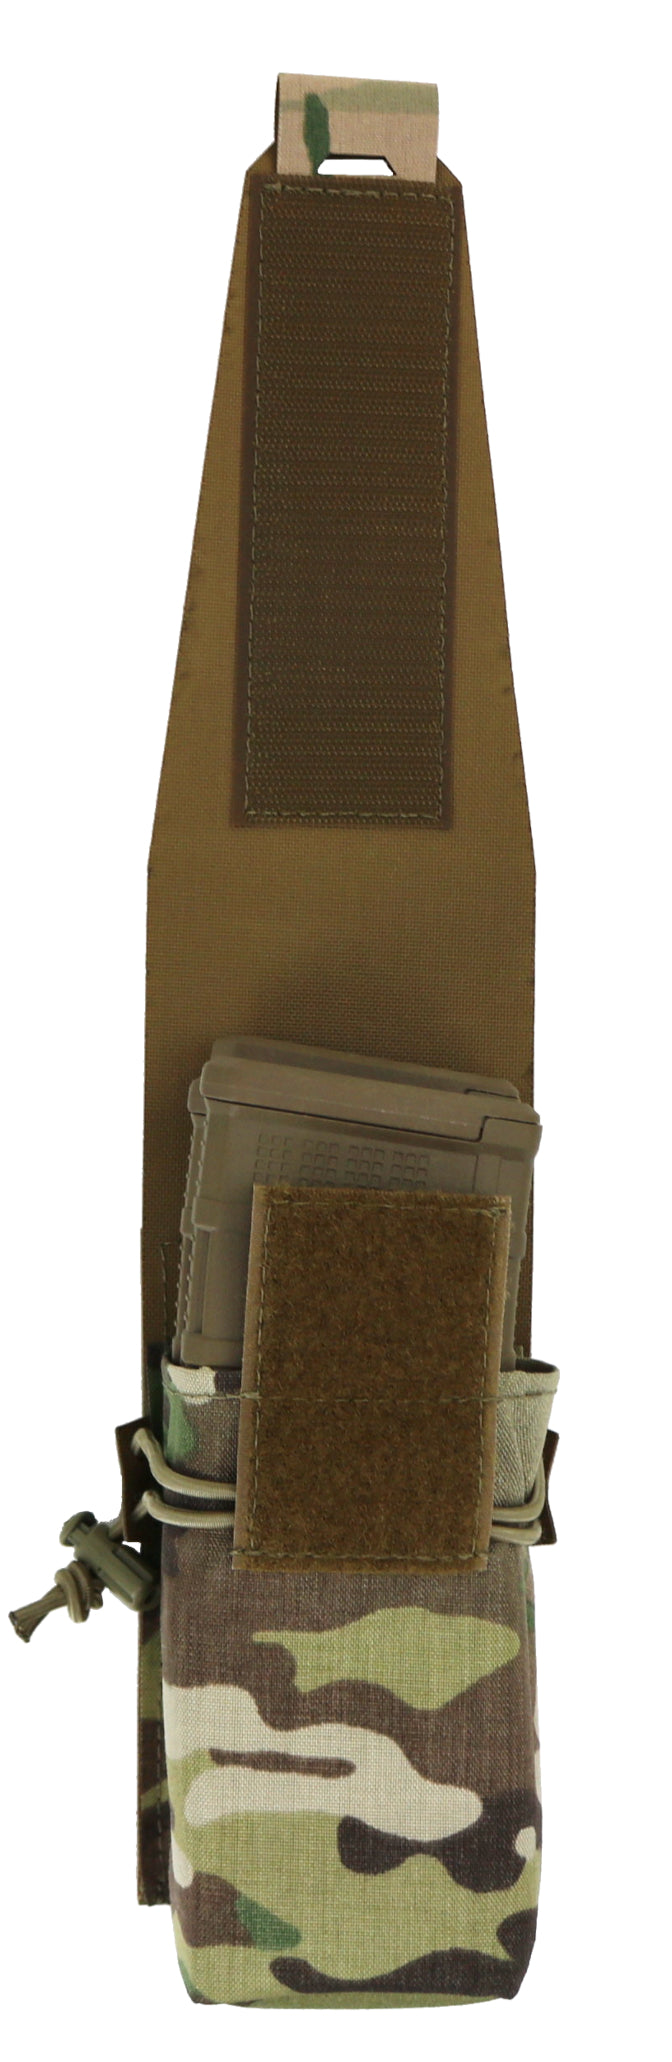 Universal Mag Pouch